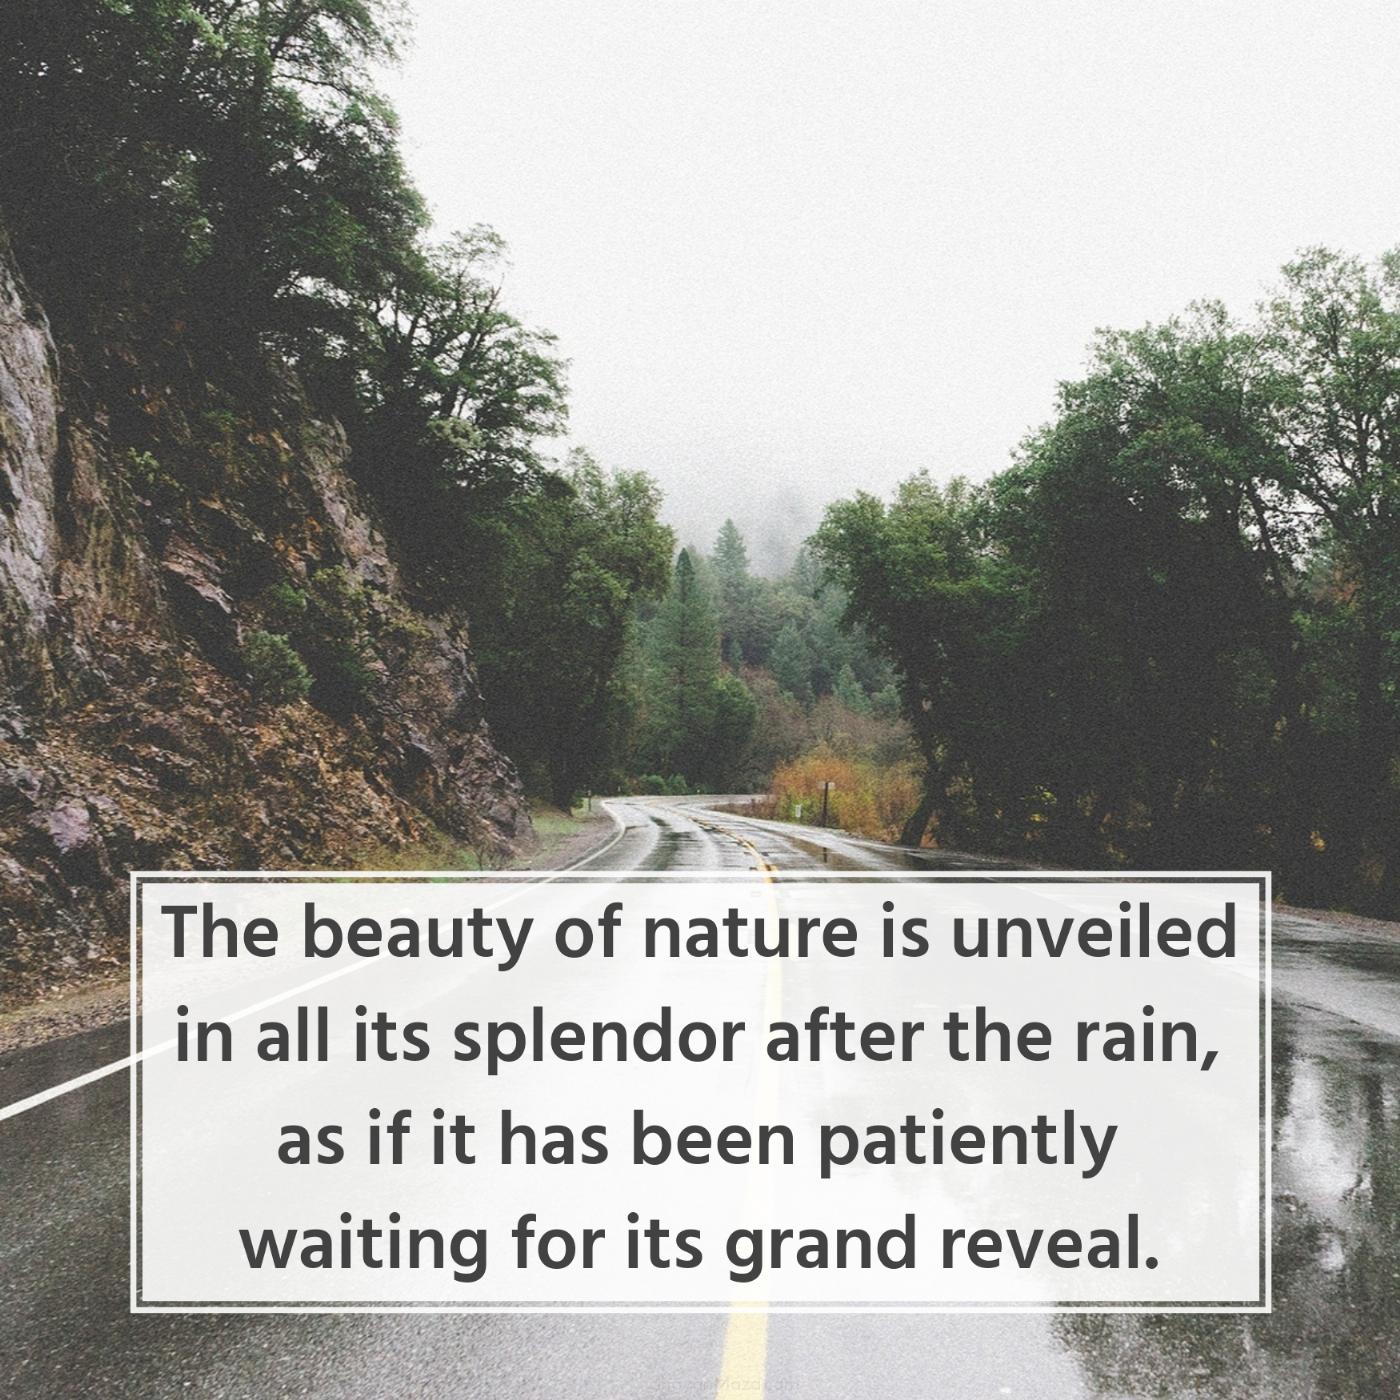 The beauty of nature is unveiled in all its splendor after the rain